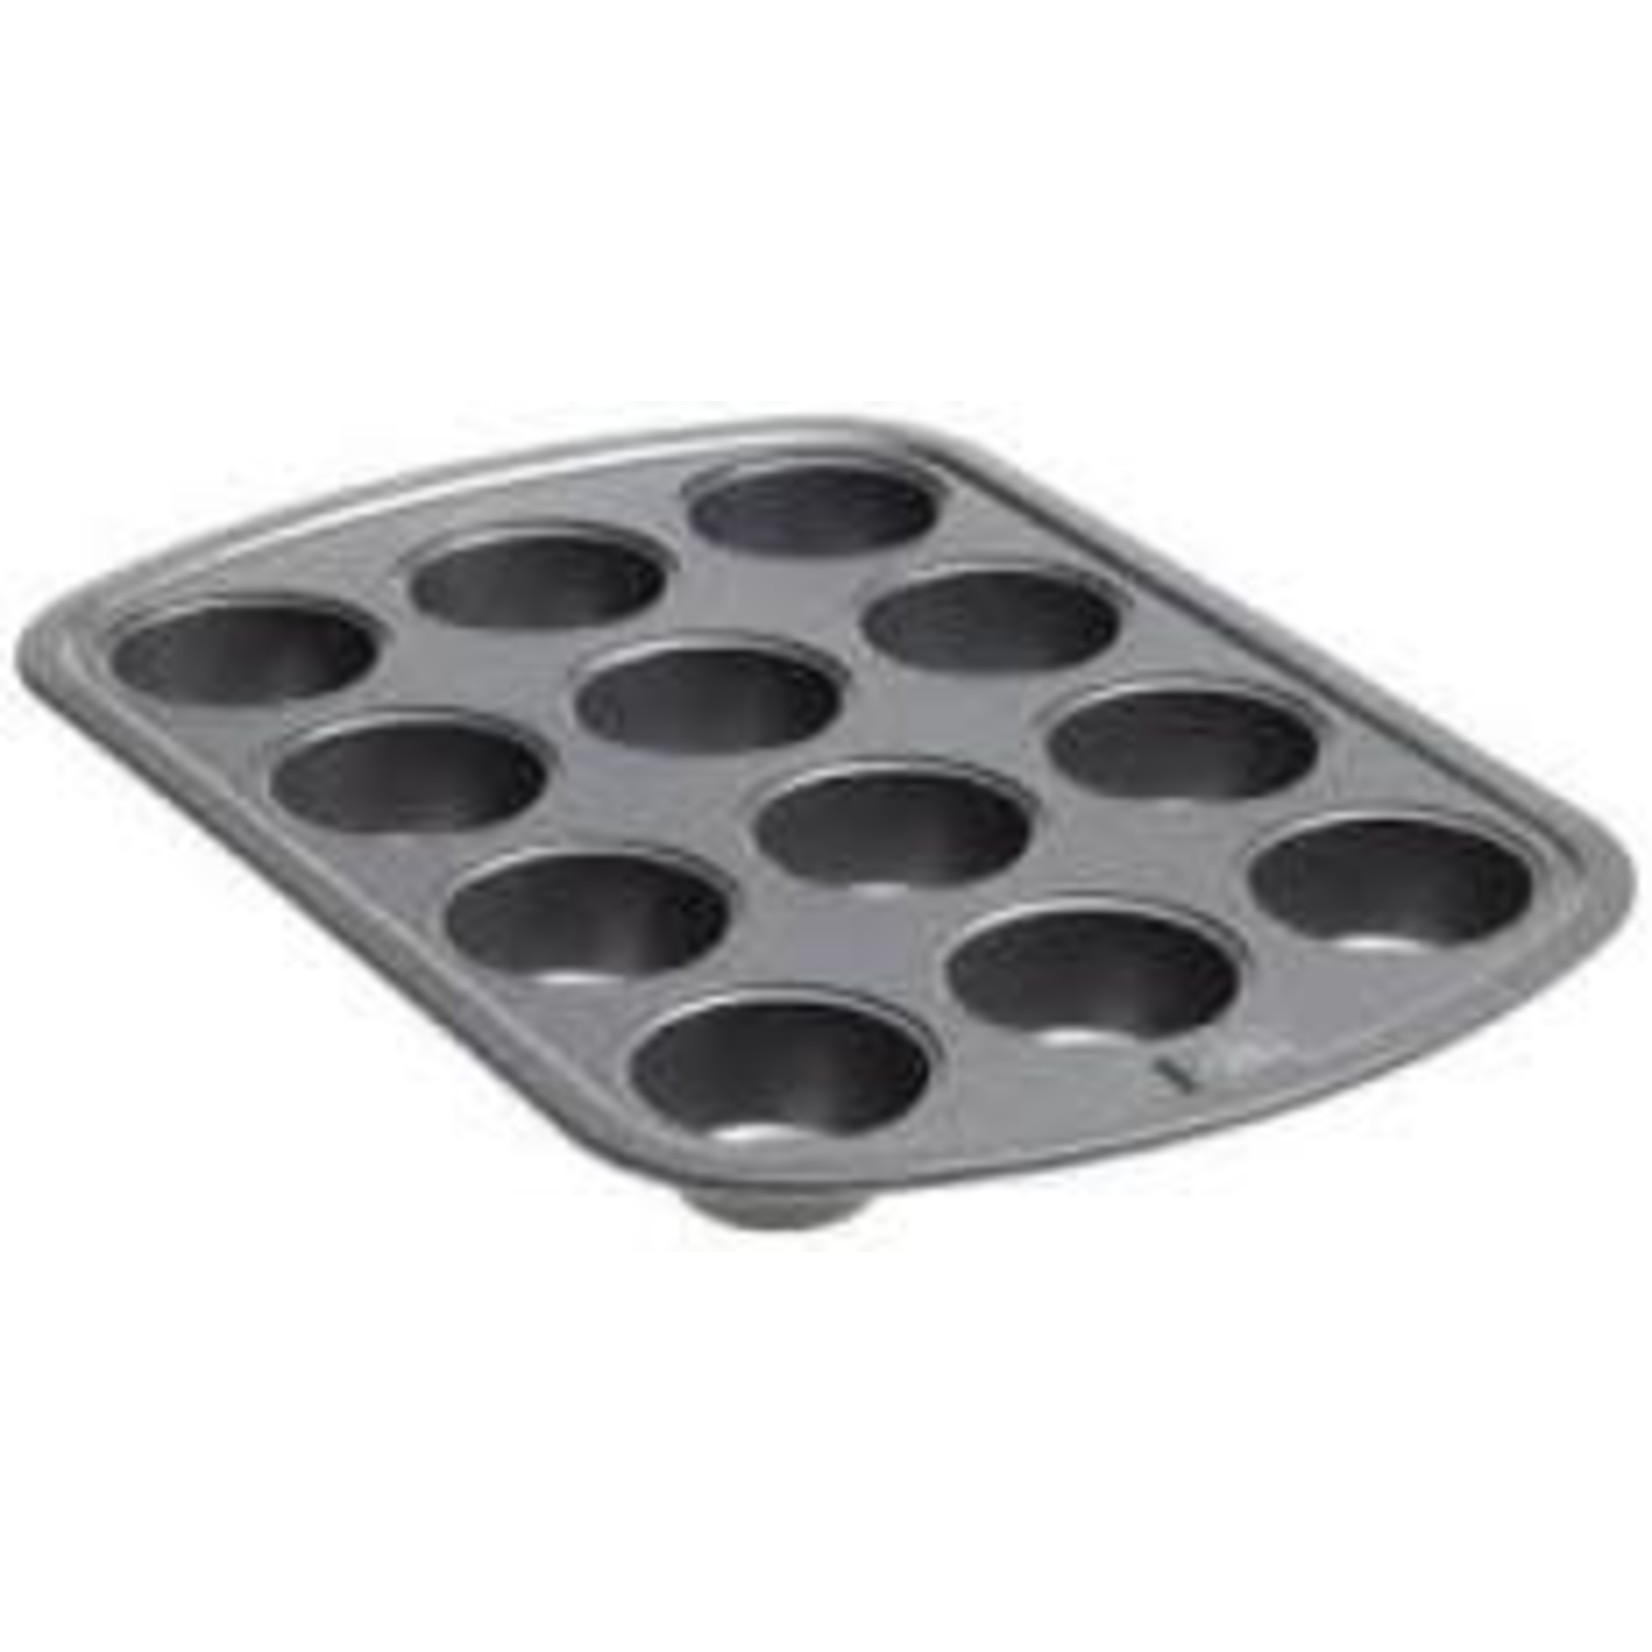 TWS Non Stick 6 Cup Jumbo Muffin Pan - The Westview Shop